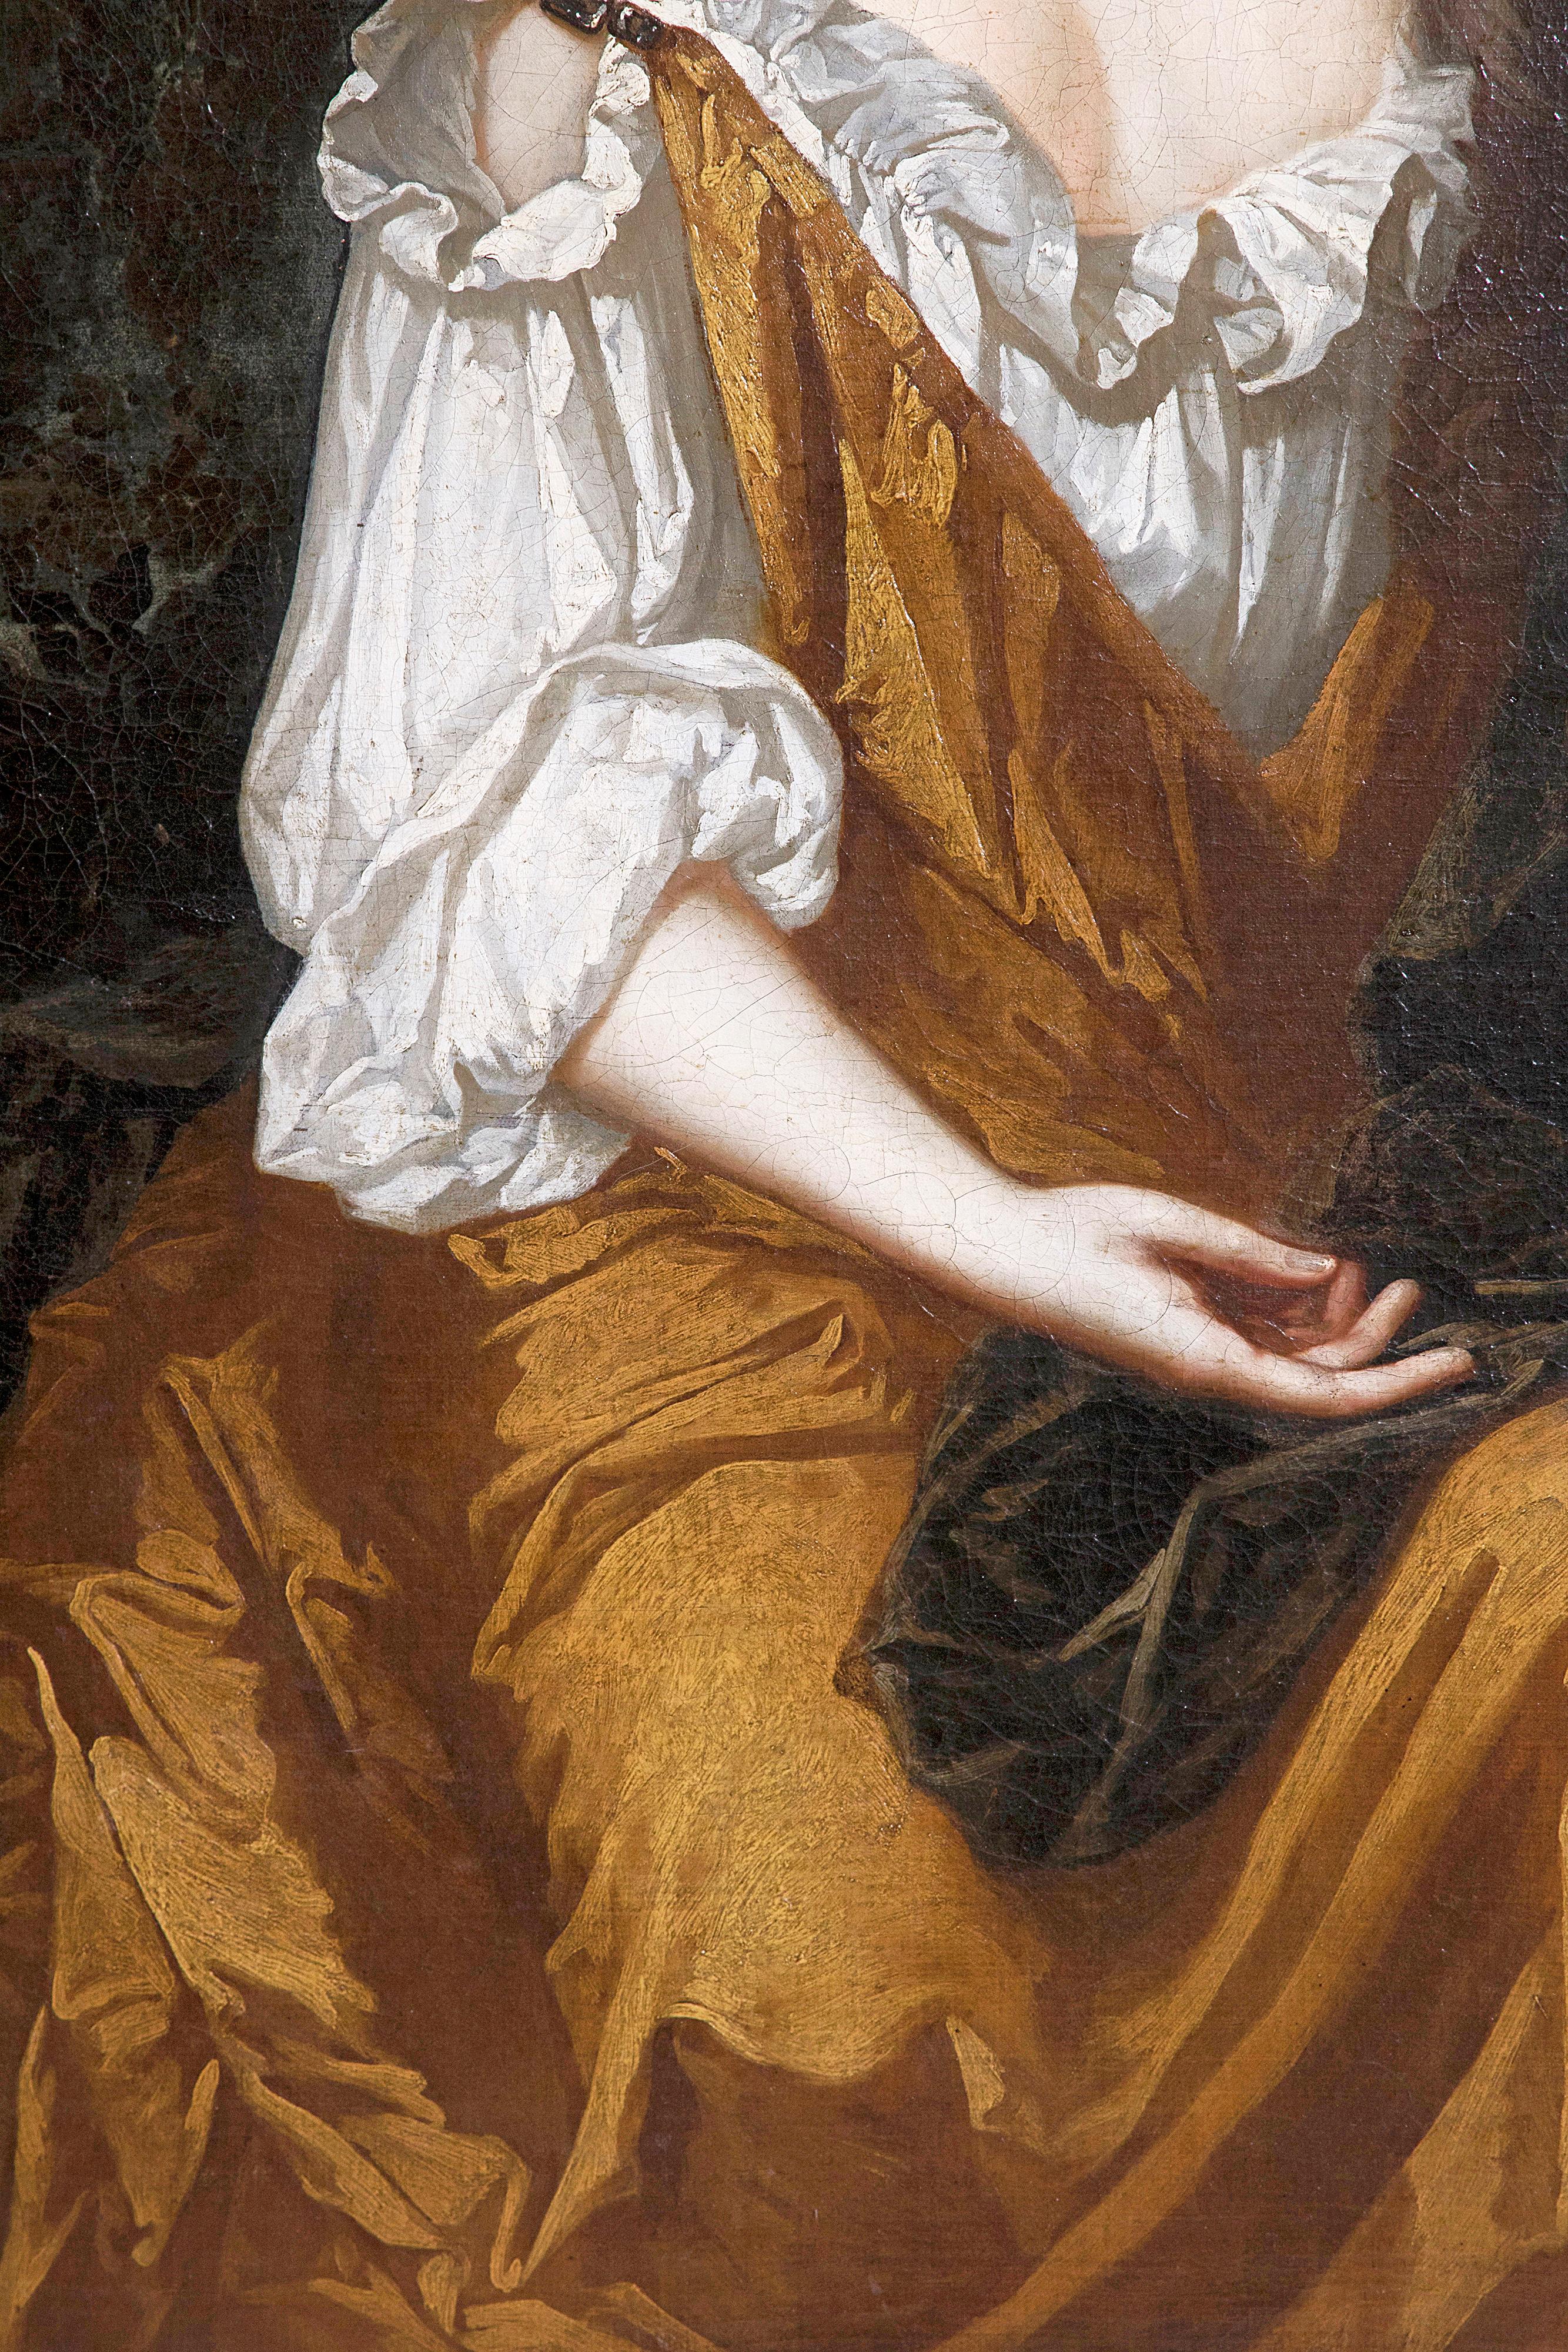 A well-executed large oil on canvas portrait of Mrs. Overbury seated three-quarter length, wearing a gold dress with a brown cloak, a landscape with a parkland beyond inscribed with the name of the sitter. The quality of the painting suggest an